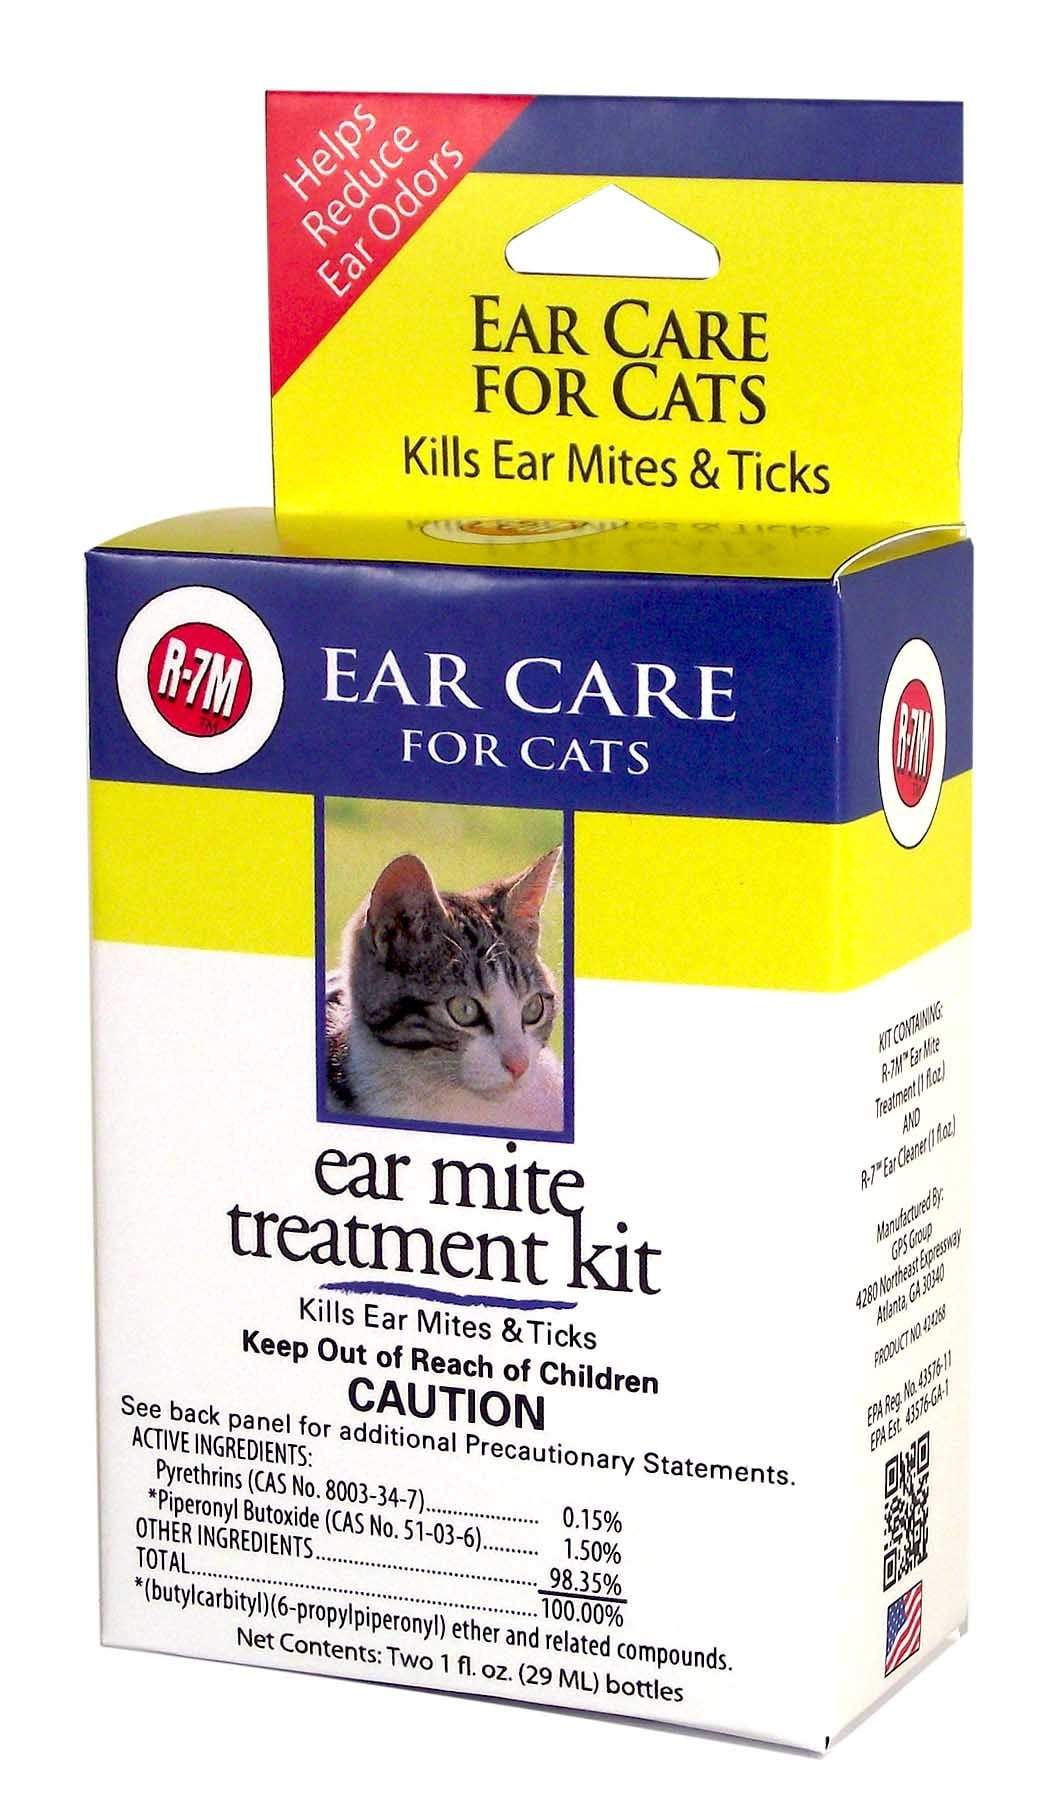 ear-mite-treatment-kit-for-cats-miracle-care-pet-products